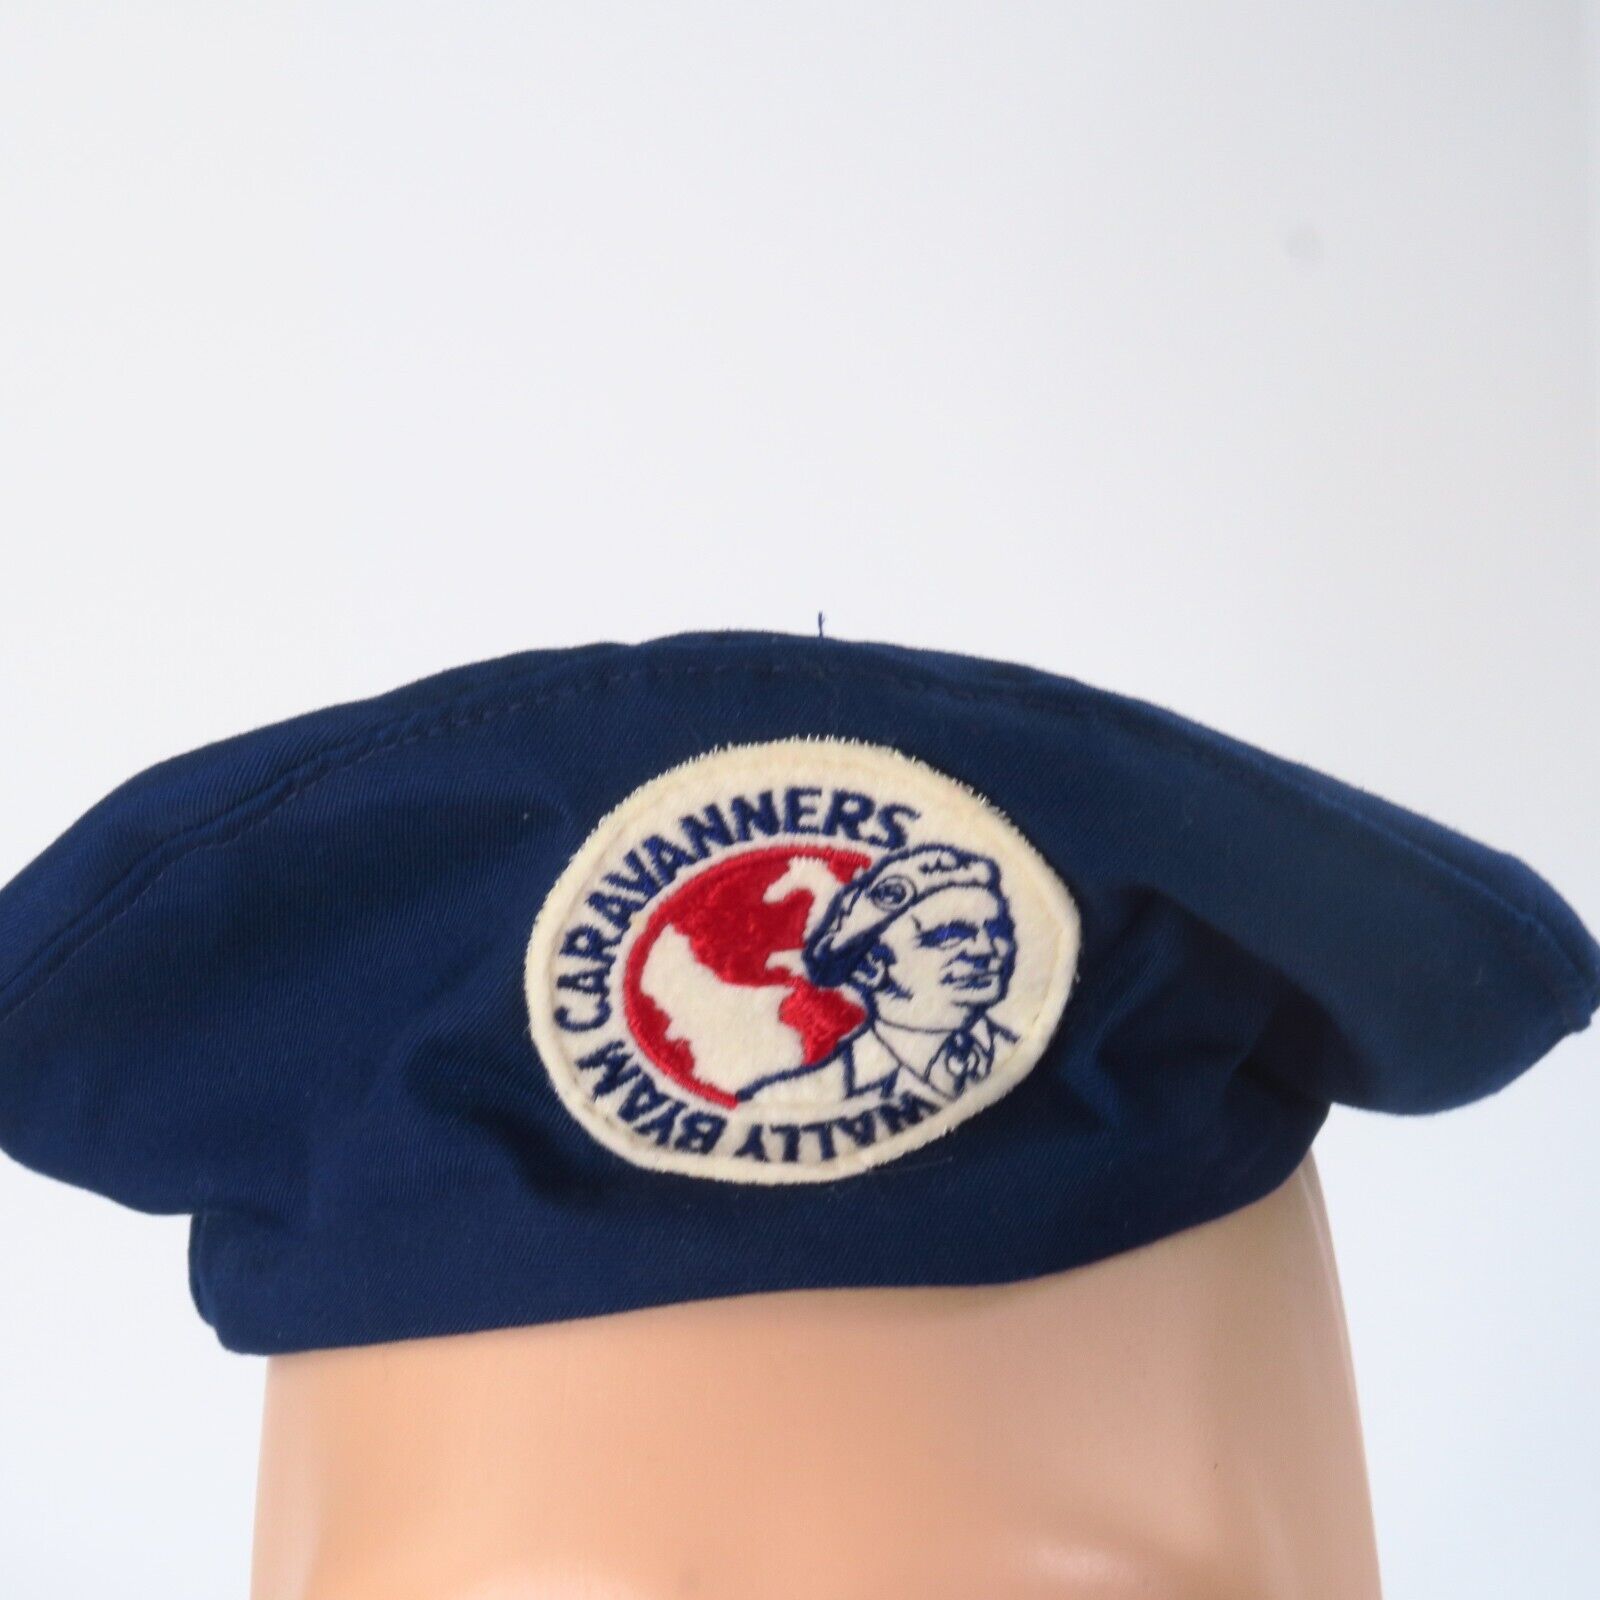 Vintage WALLY BYAM Caravanners Cali-Fame Beret Hat Blue WBCCI Airstream S